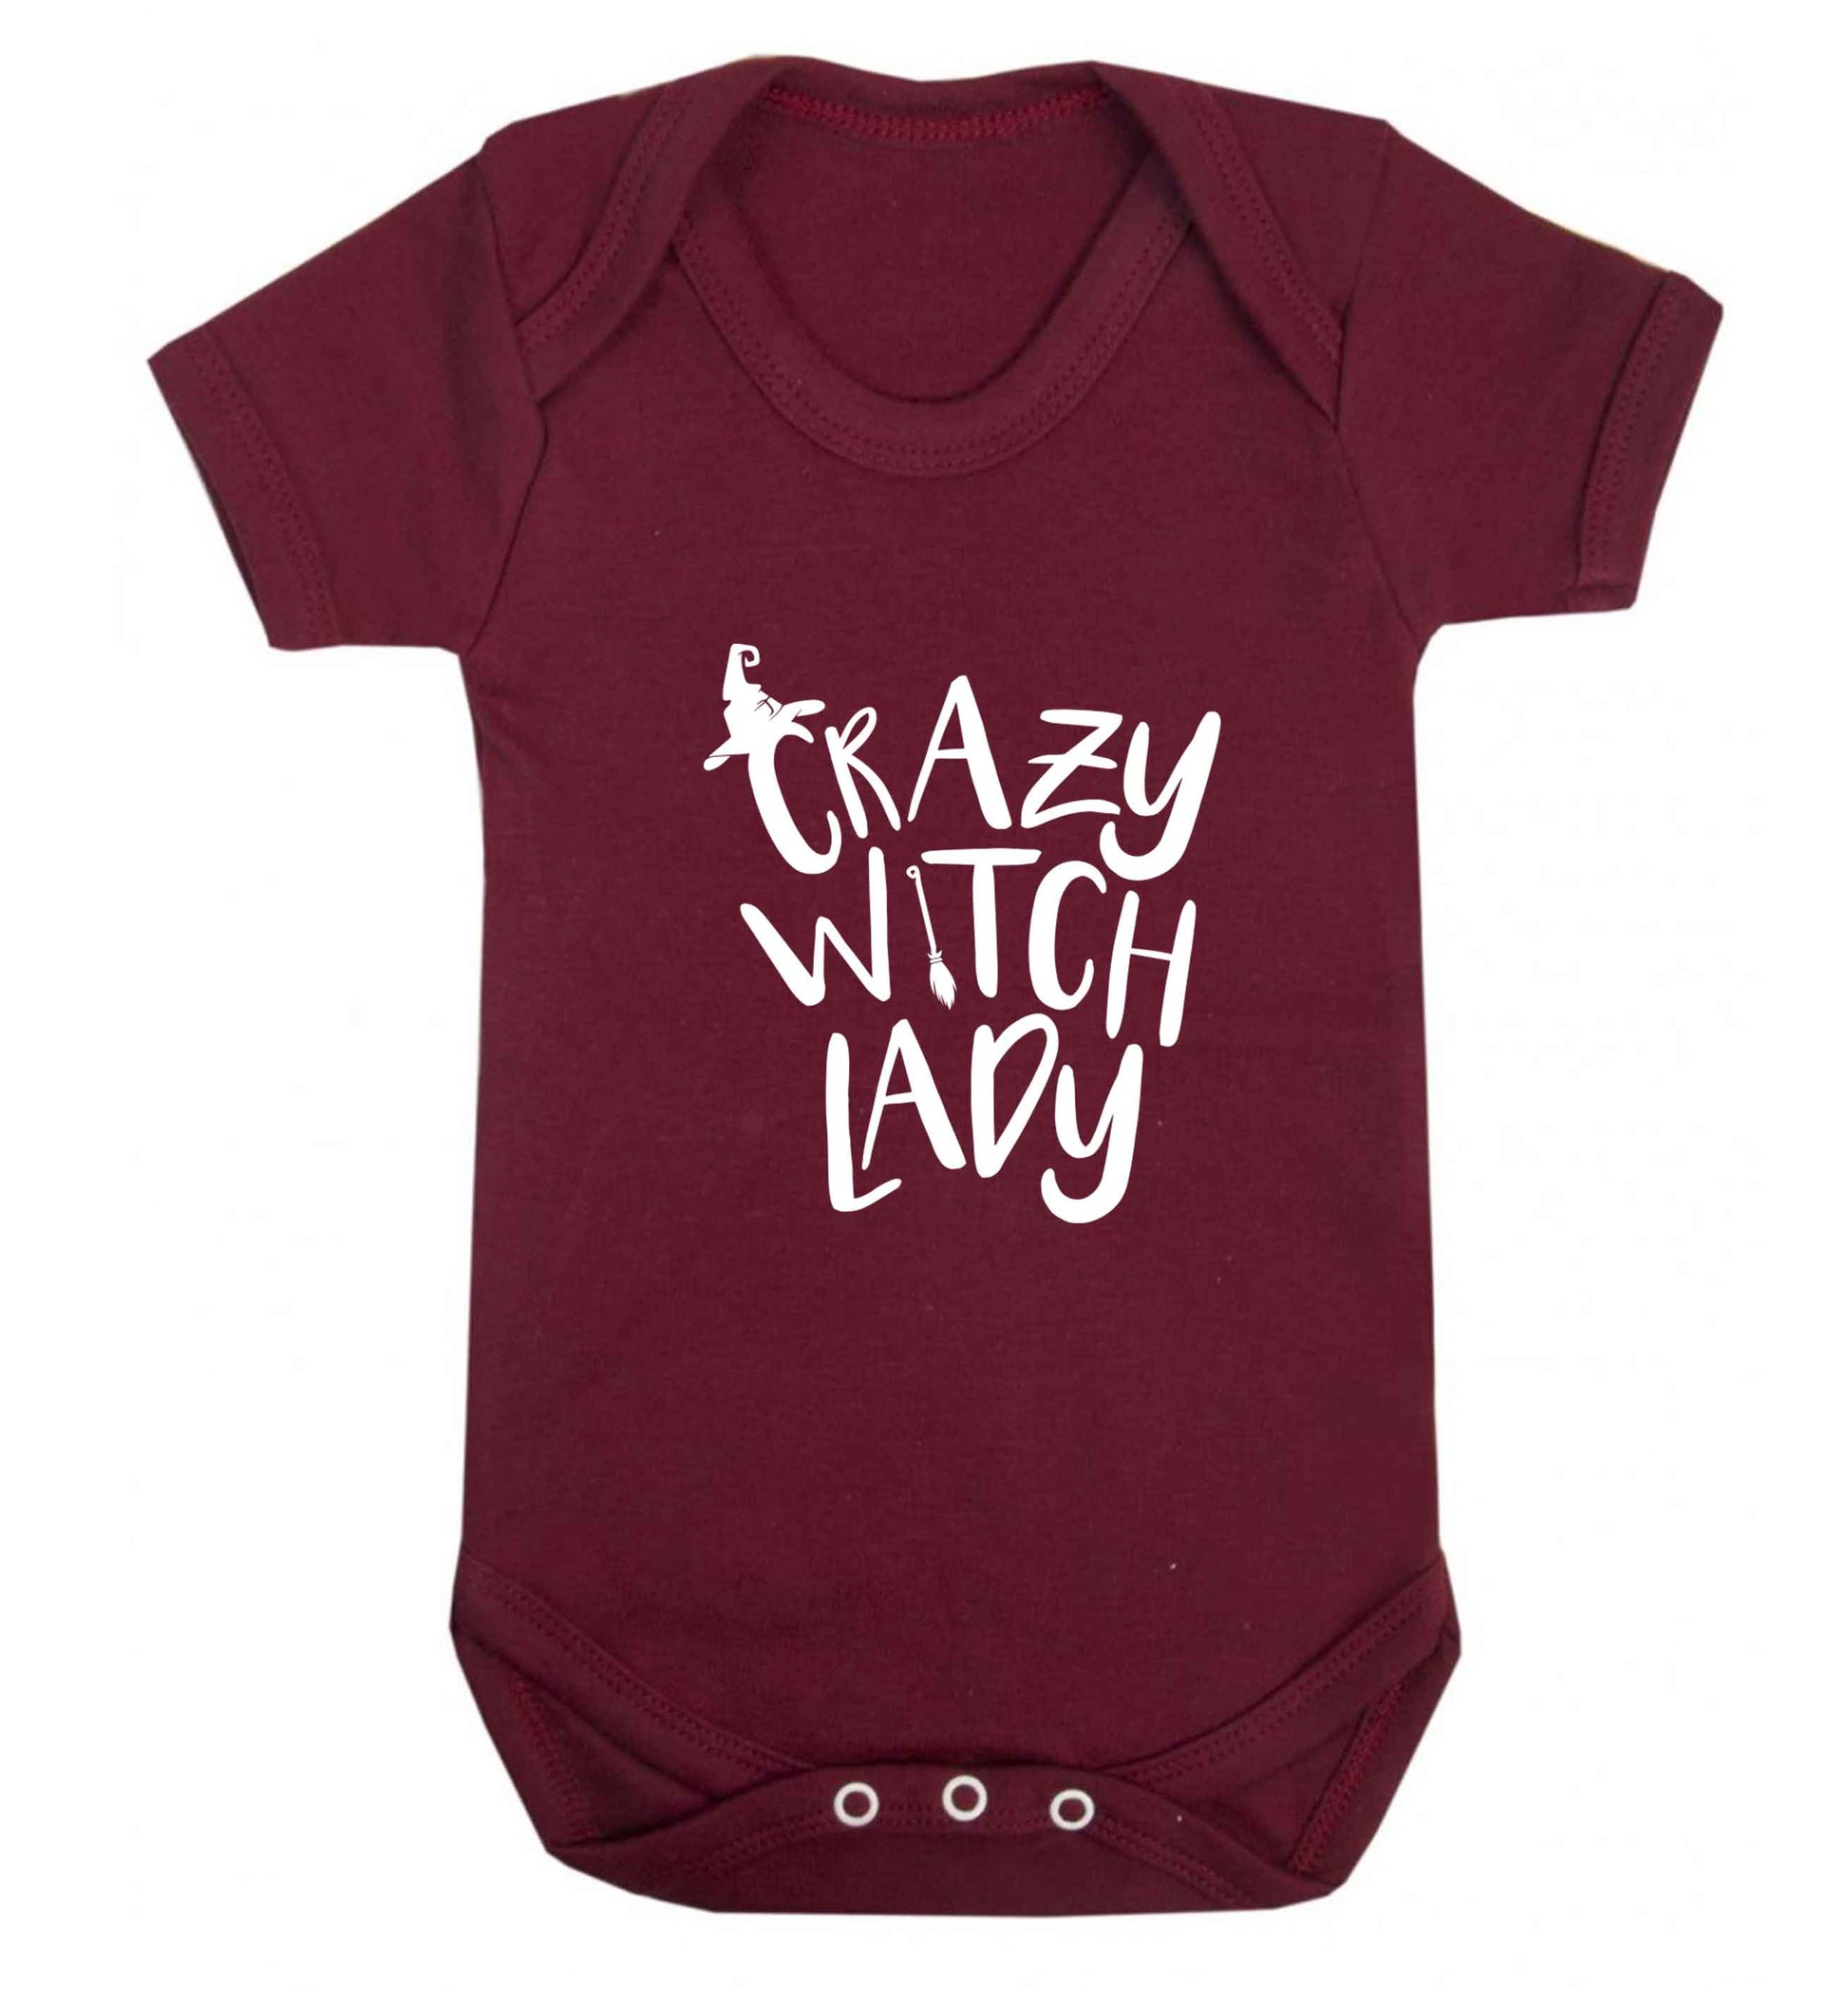 Crazy witch lady baby vest maroon 18-24 months